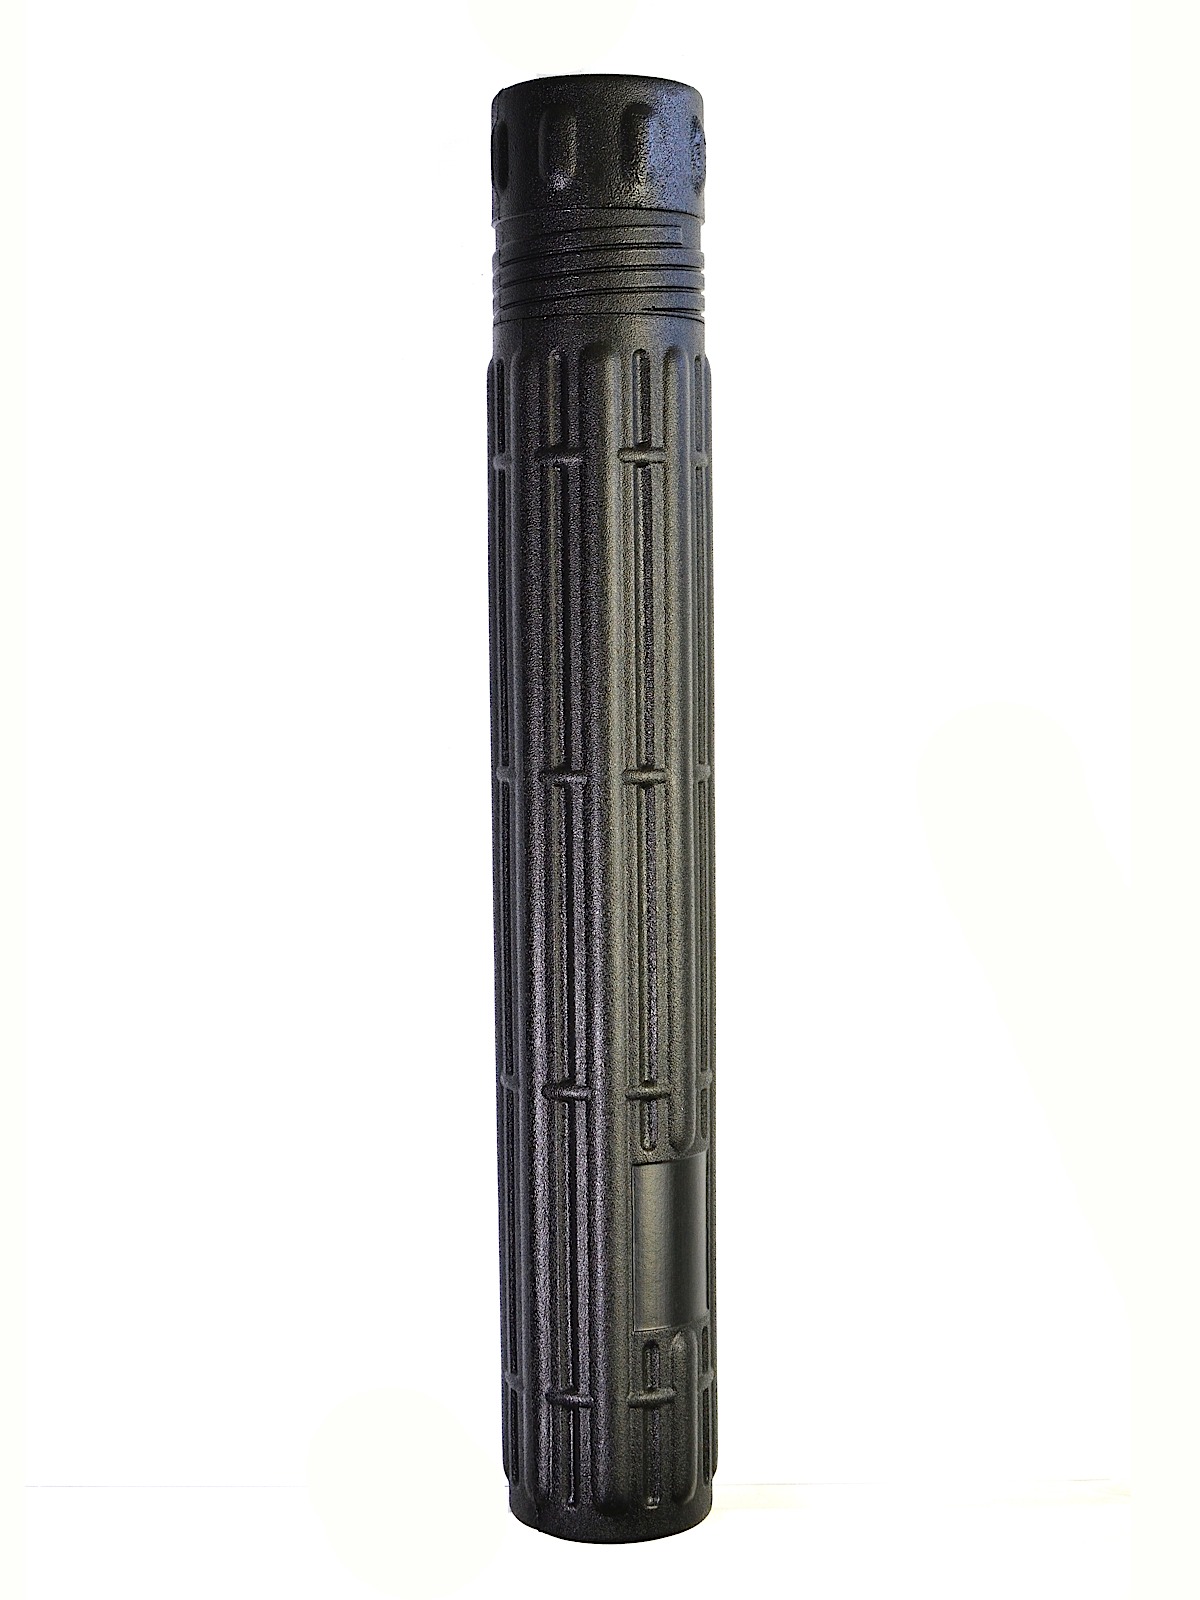 Expandable Tube System Large Tube 24 In. X 3 1 2 In. Black